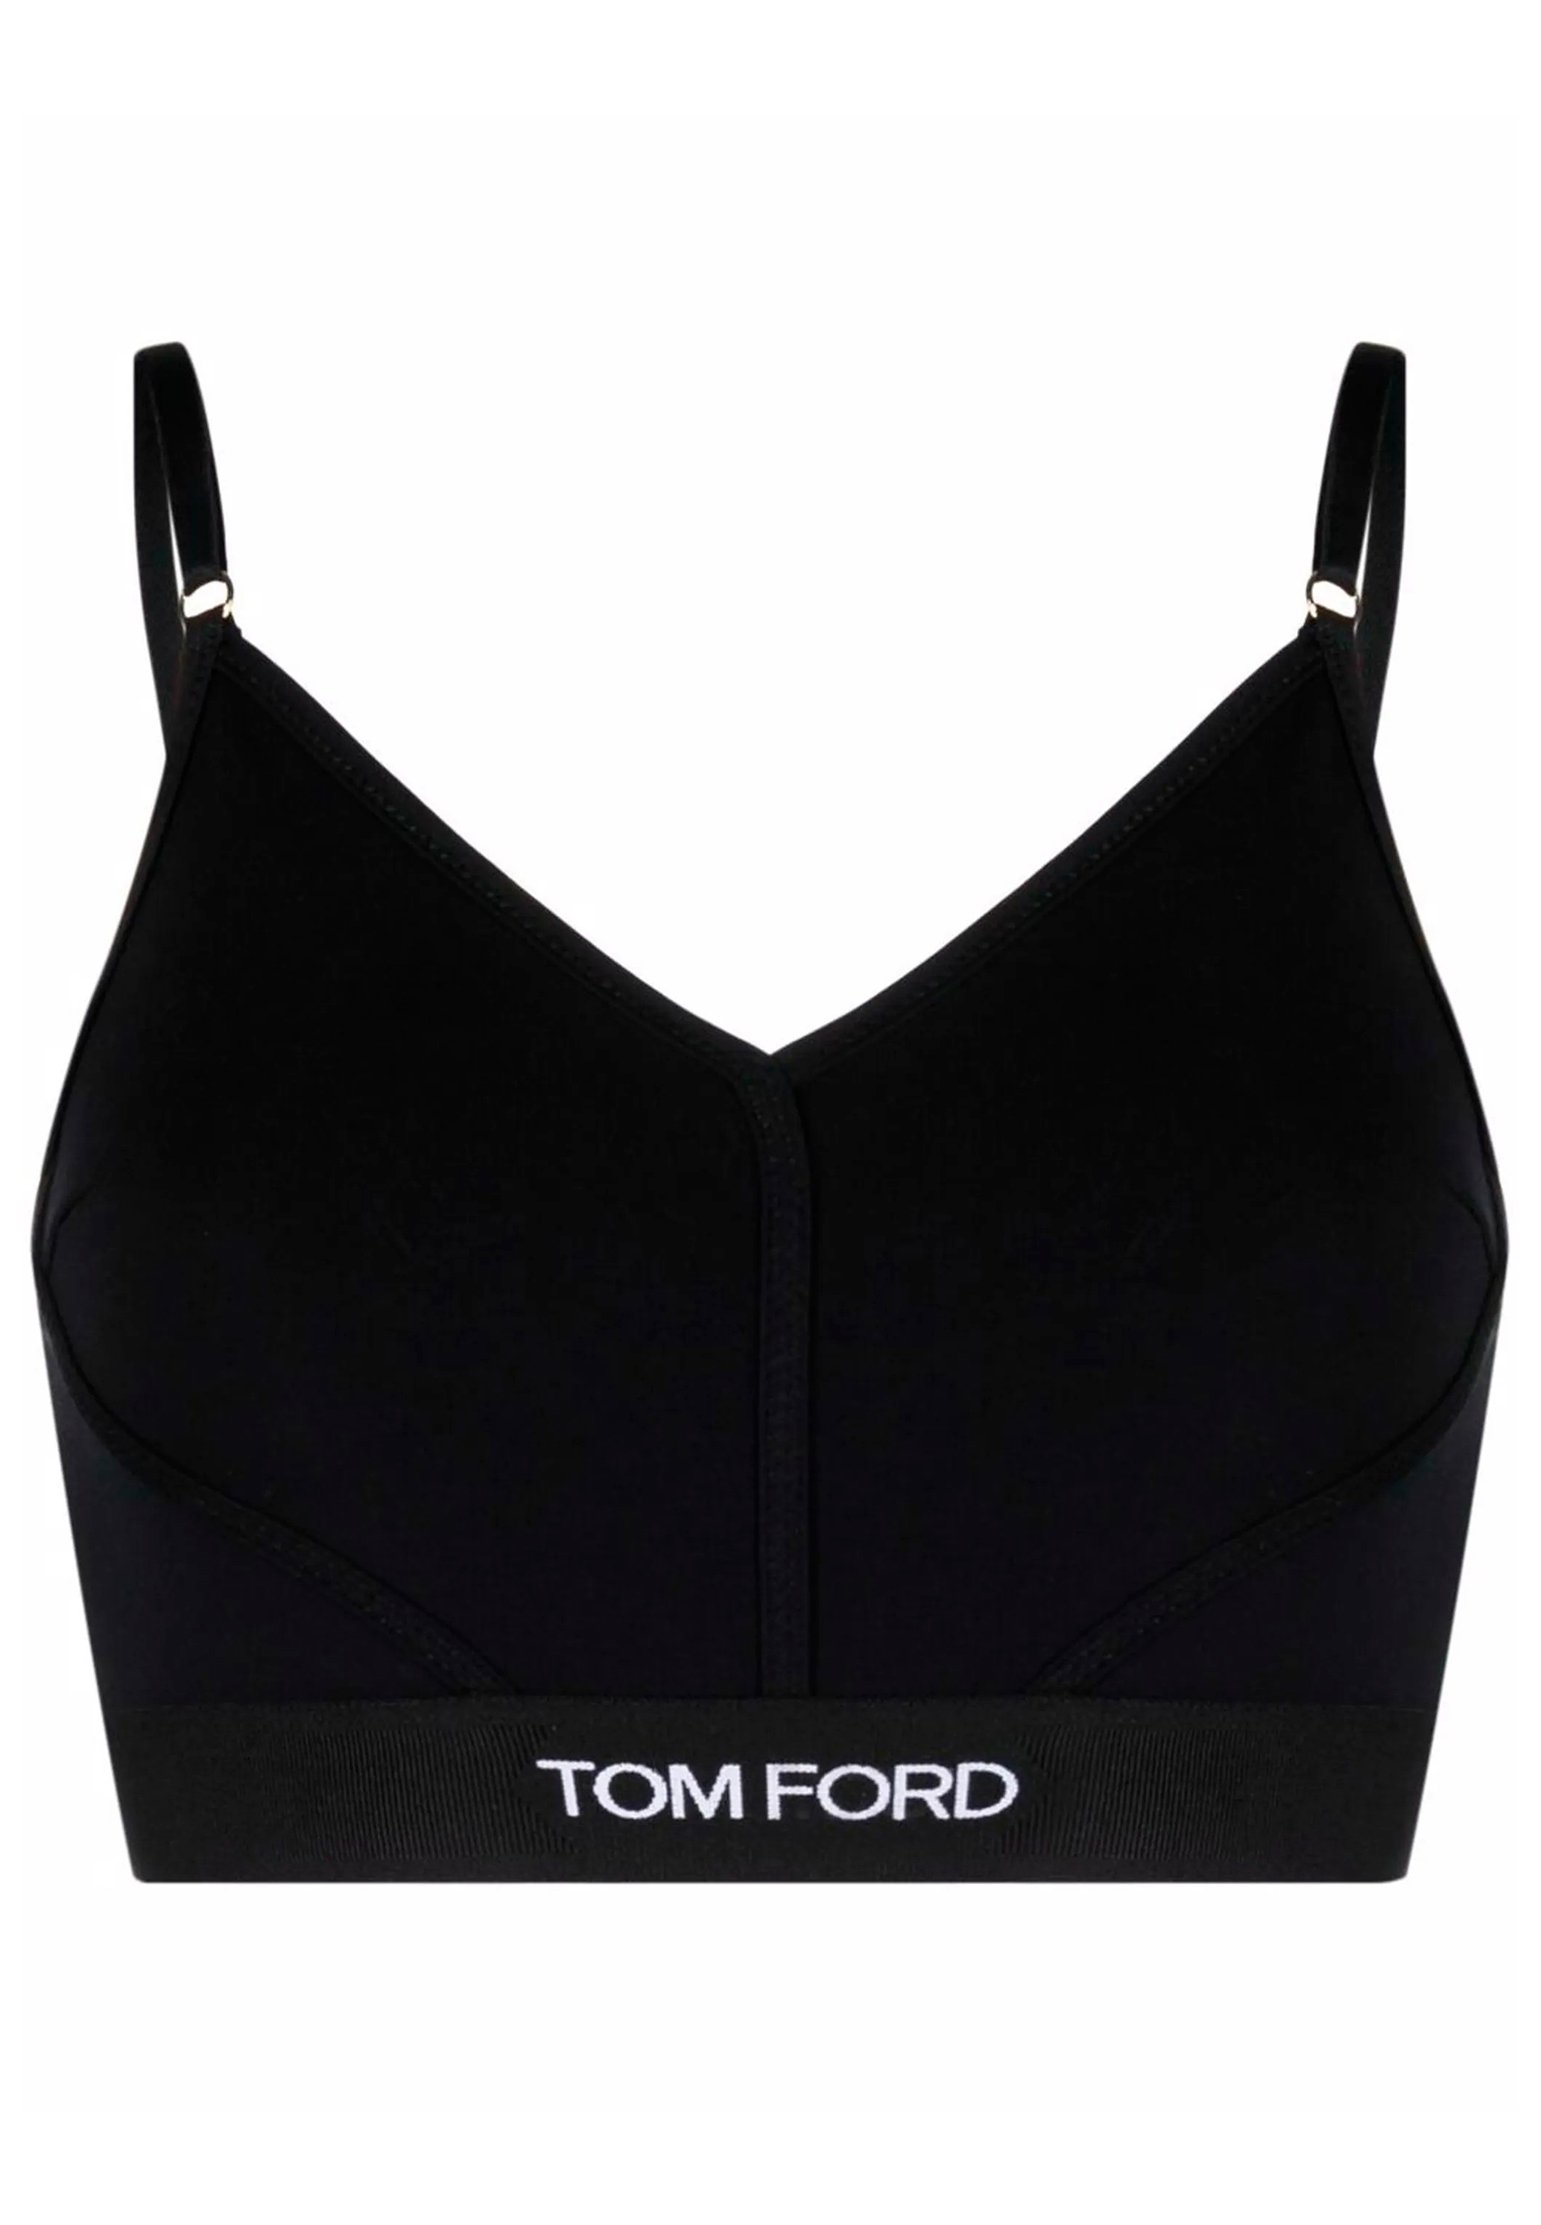 Top TOM FORD Color: black (Code: 1953) in online store Allure